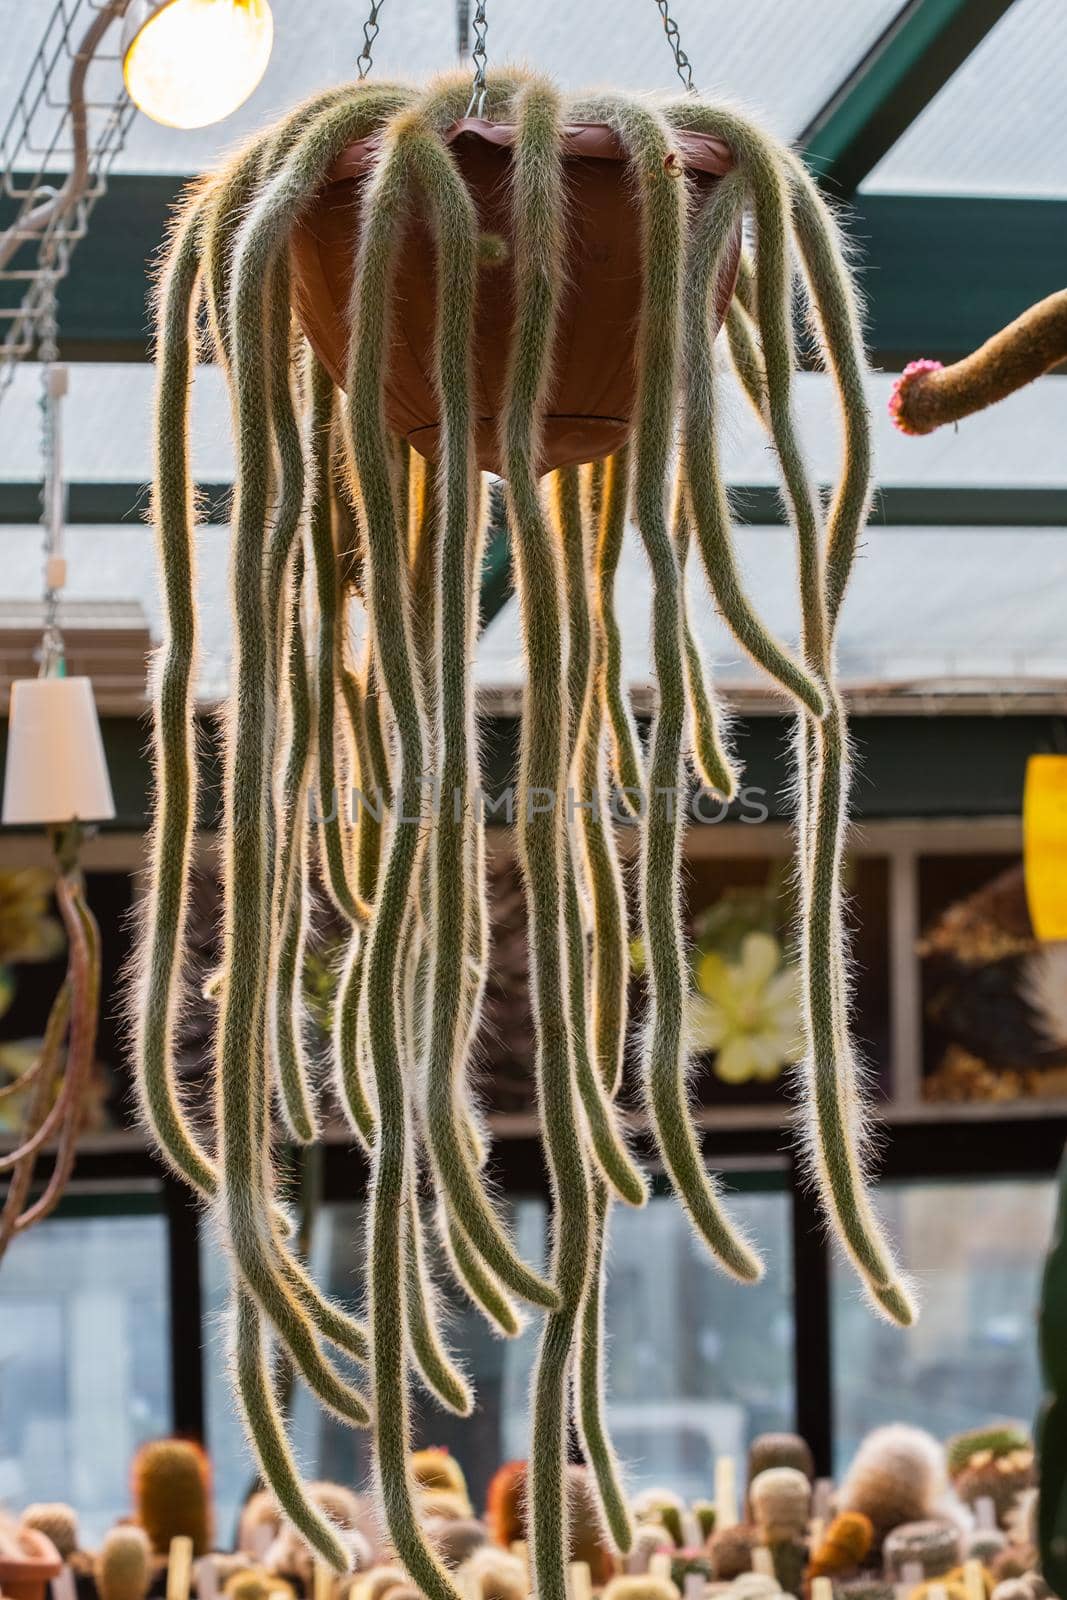 A bizarre tropical cactus descends from a hanging pot in a greenhouse by galinasharapova